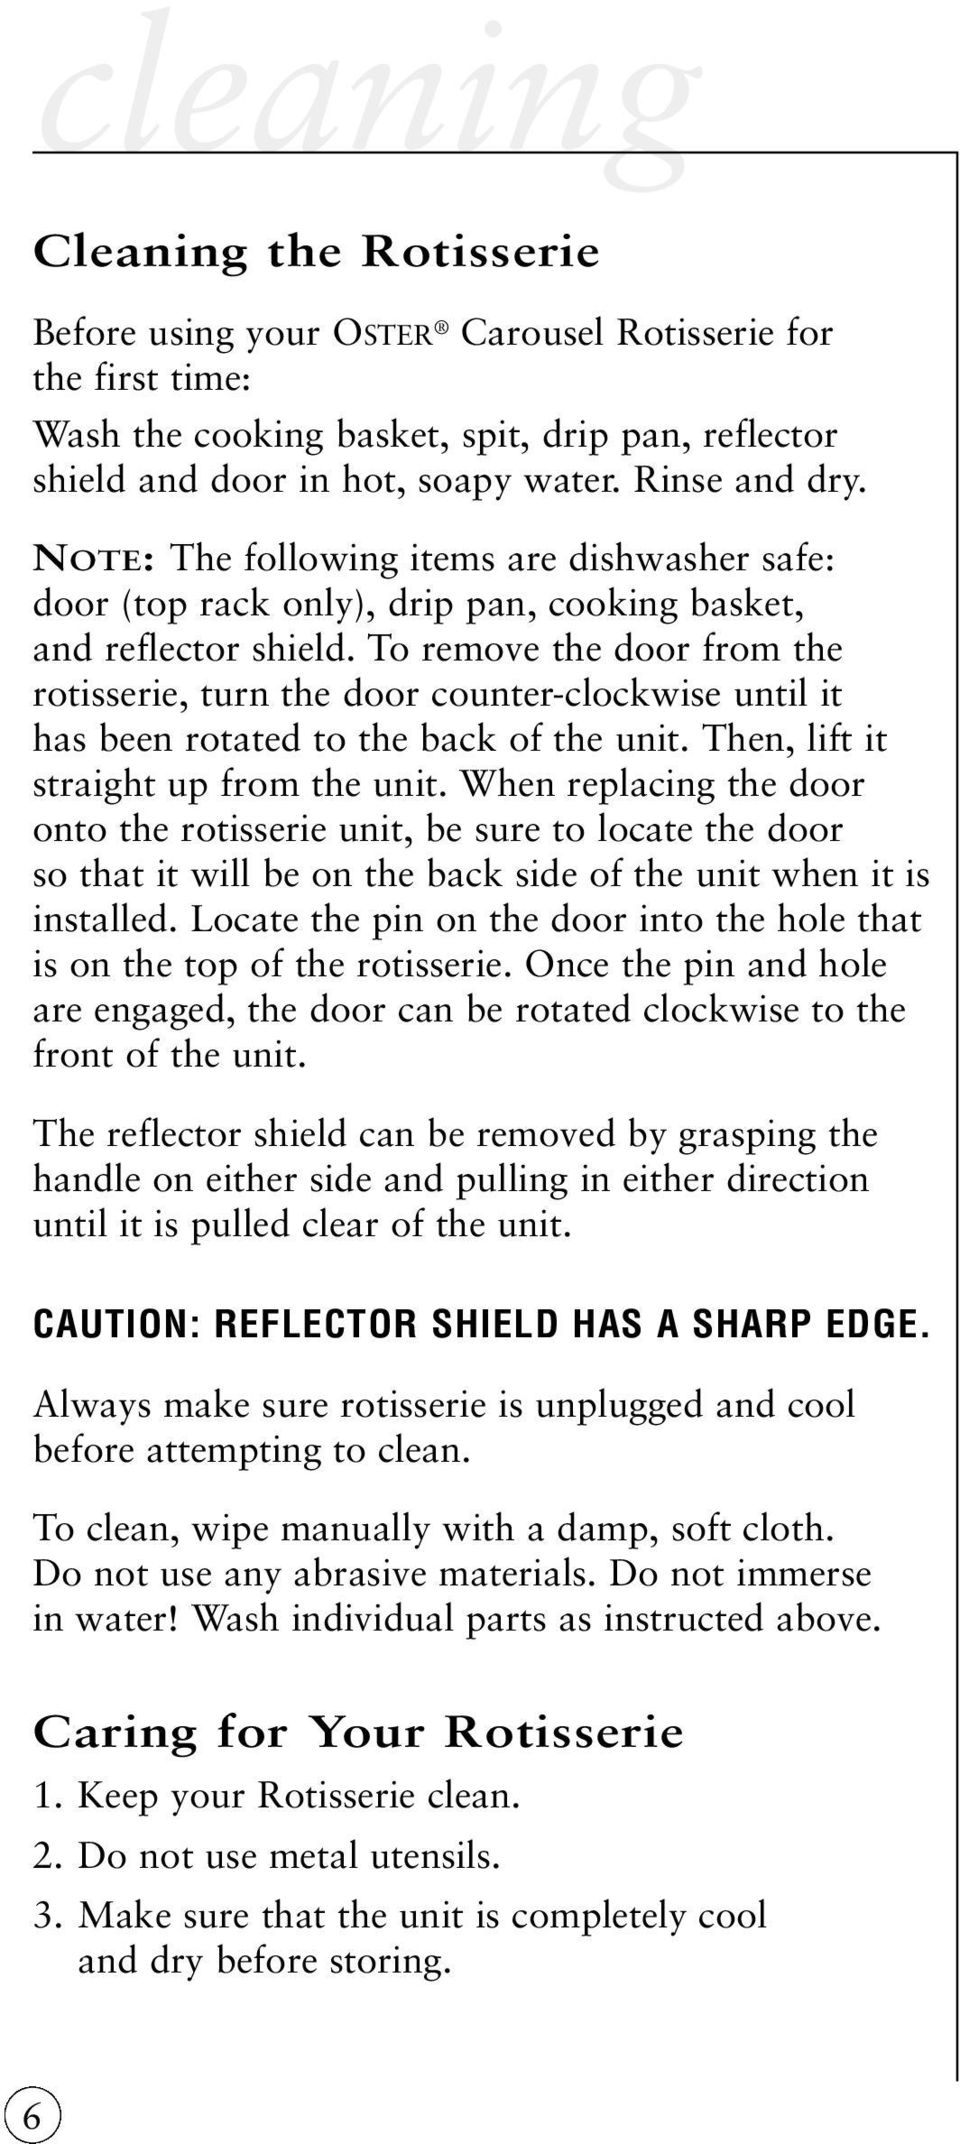 To remove the door from the rotisserie, turn the door counter-clockwise until it has been rotated to the back of the unit. Then, lift it straight up from the unit.